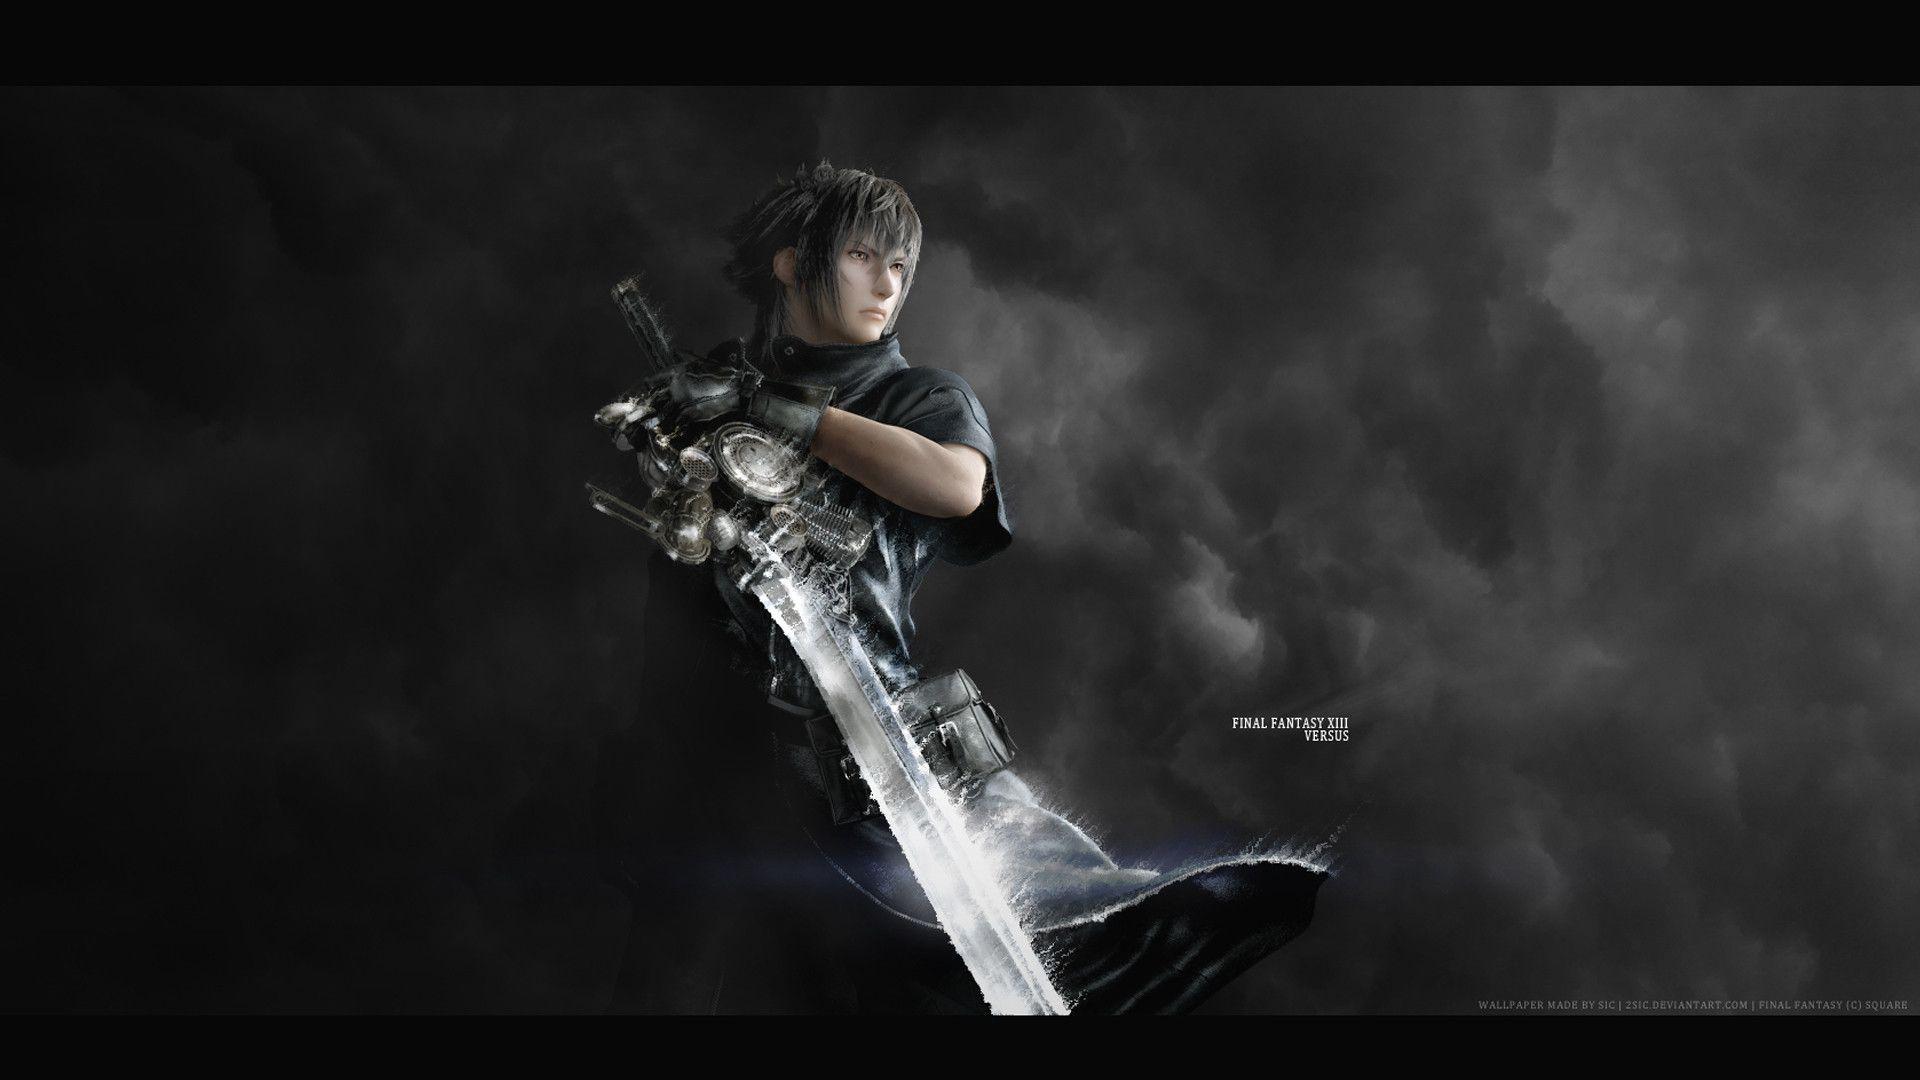 hero of the game against the clouds Final Fantasy xv wallpaper